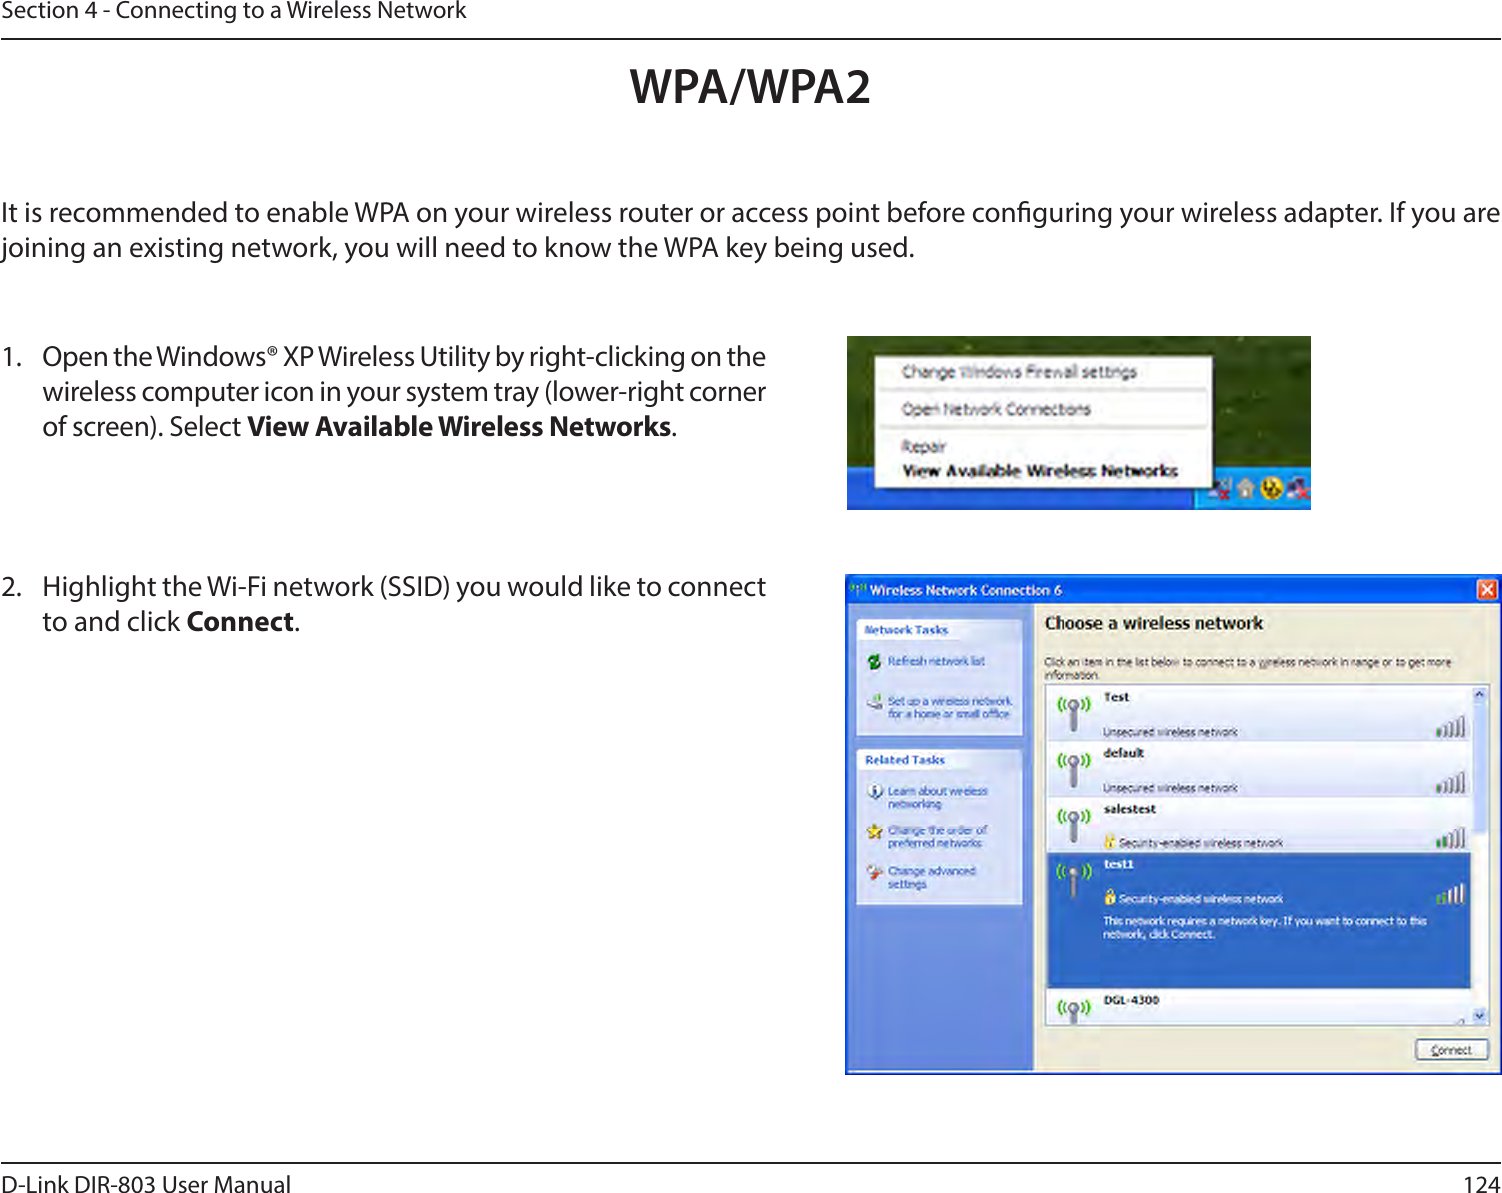 124D-Link DIR-803 User ManualSection 4 - Connecting to a Wireless NetworkIt is recommended to enable WPA on your wireless router or access point before conguring your wireless adapter. If you are joining an existing network, you will need to know the WPA key being used.2.  Highlight the Wi-Fi network (SSID) you would like to connect to and click Connect.1.  Open the Windows® XP Wireless Utility by right-clicking on the wireless computer icon in your system tray (lower-right corner of screen). Select View Available Wireless Networks. WPA/WPA2